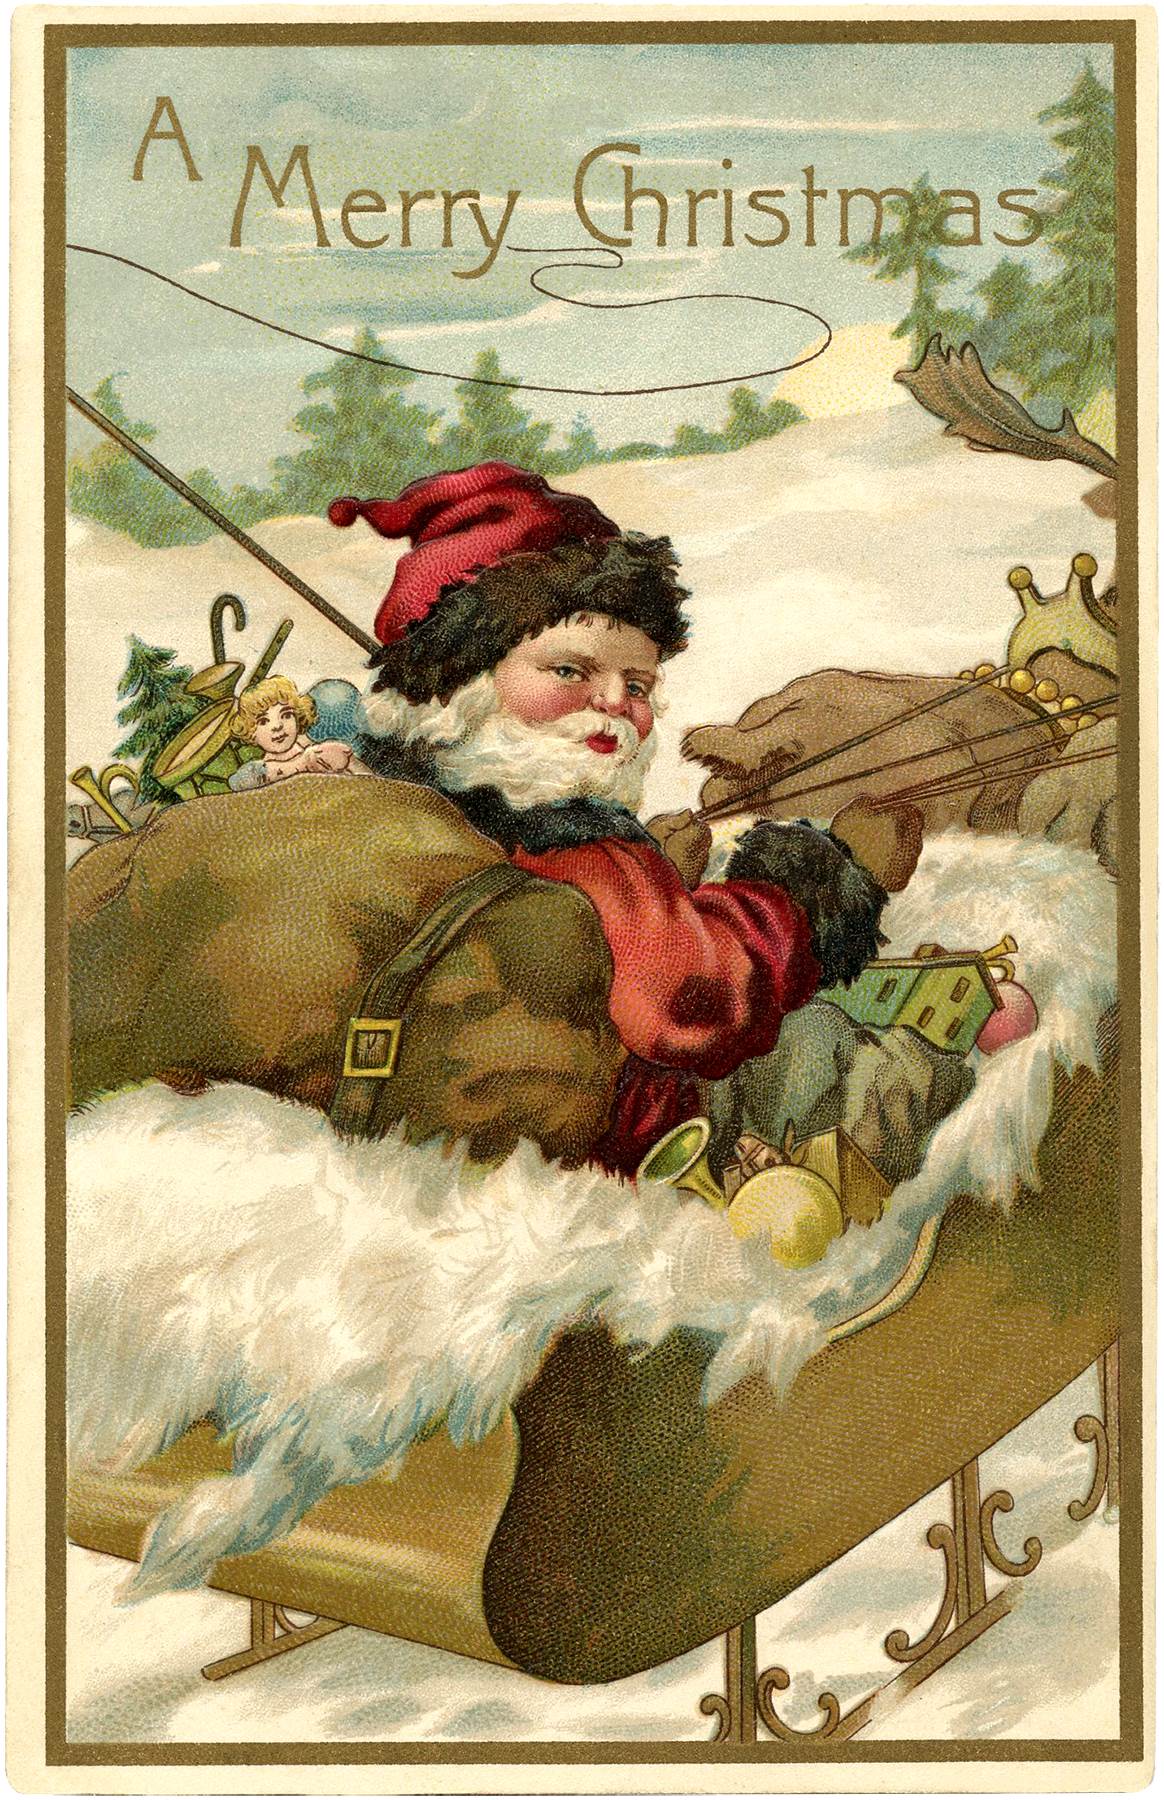 Vintage-Santa-with-Sleigh-Image-GraphicsFairy.jpg  by frankbunce